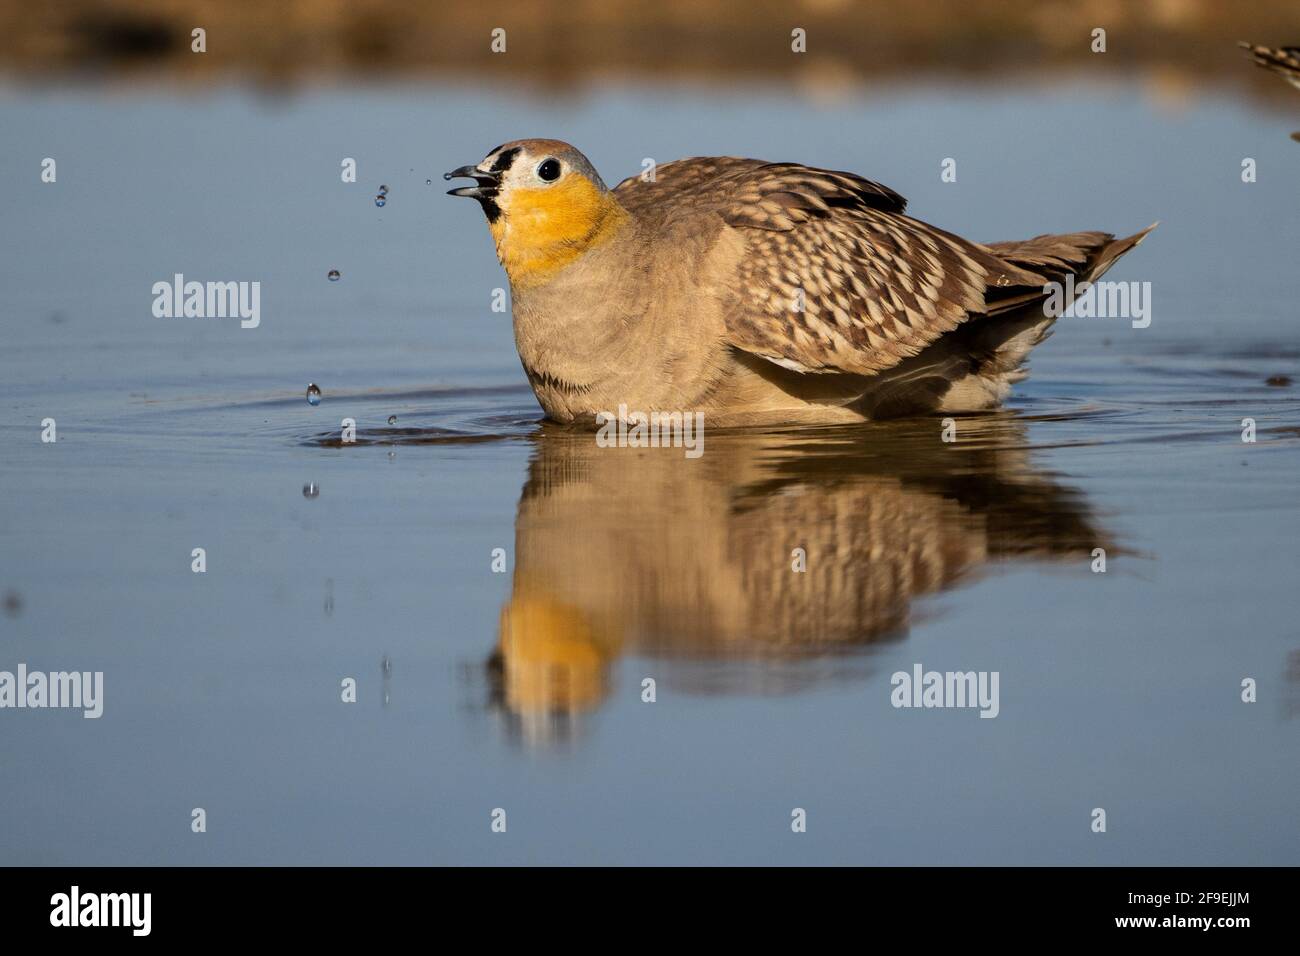 Crowned Sandgrouse (Pterocles coronatus) Near a water pool Photographed in the Negev Desert, israel in June Stock Photo